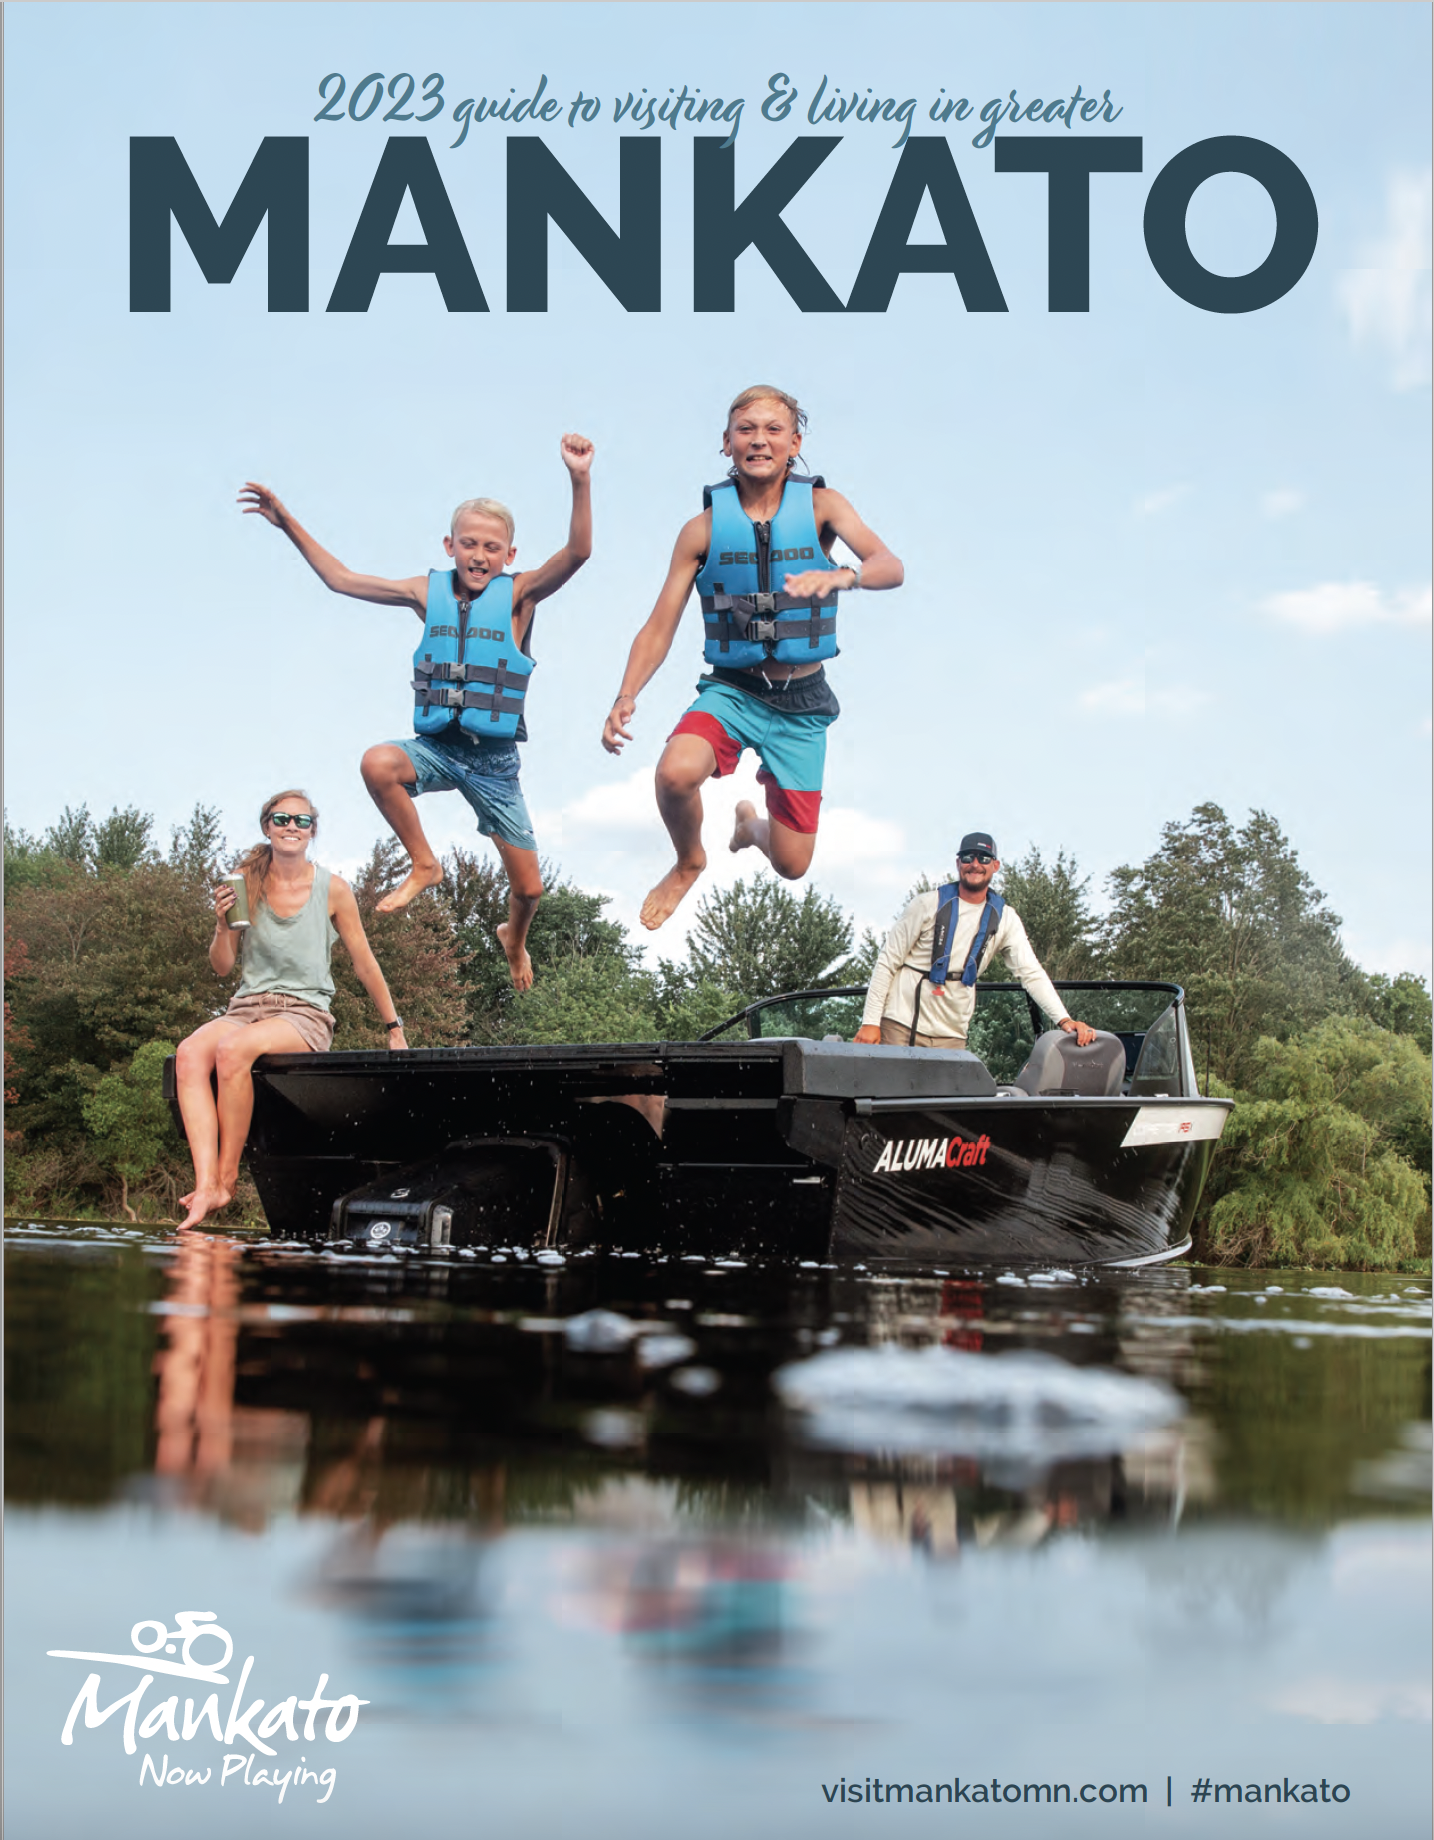 2023 Guide to Visiting and Living in Greater Mankato